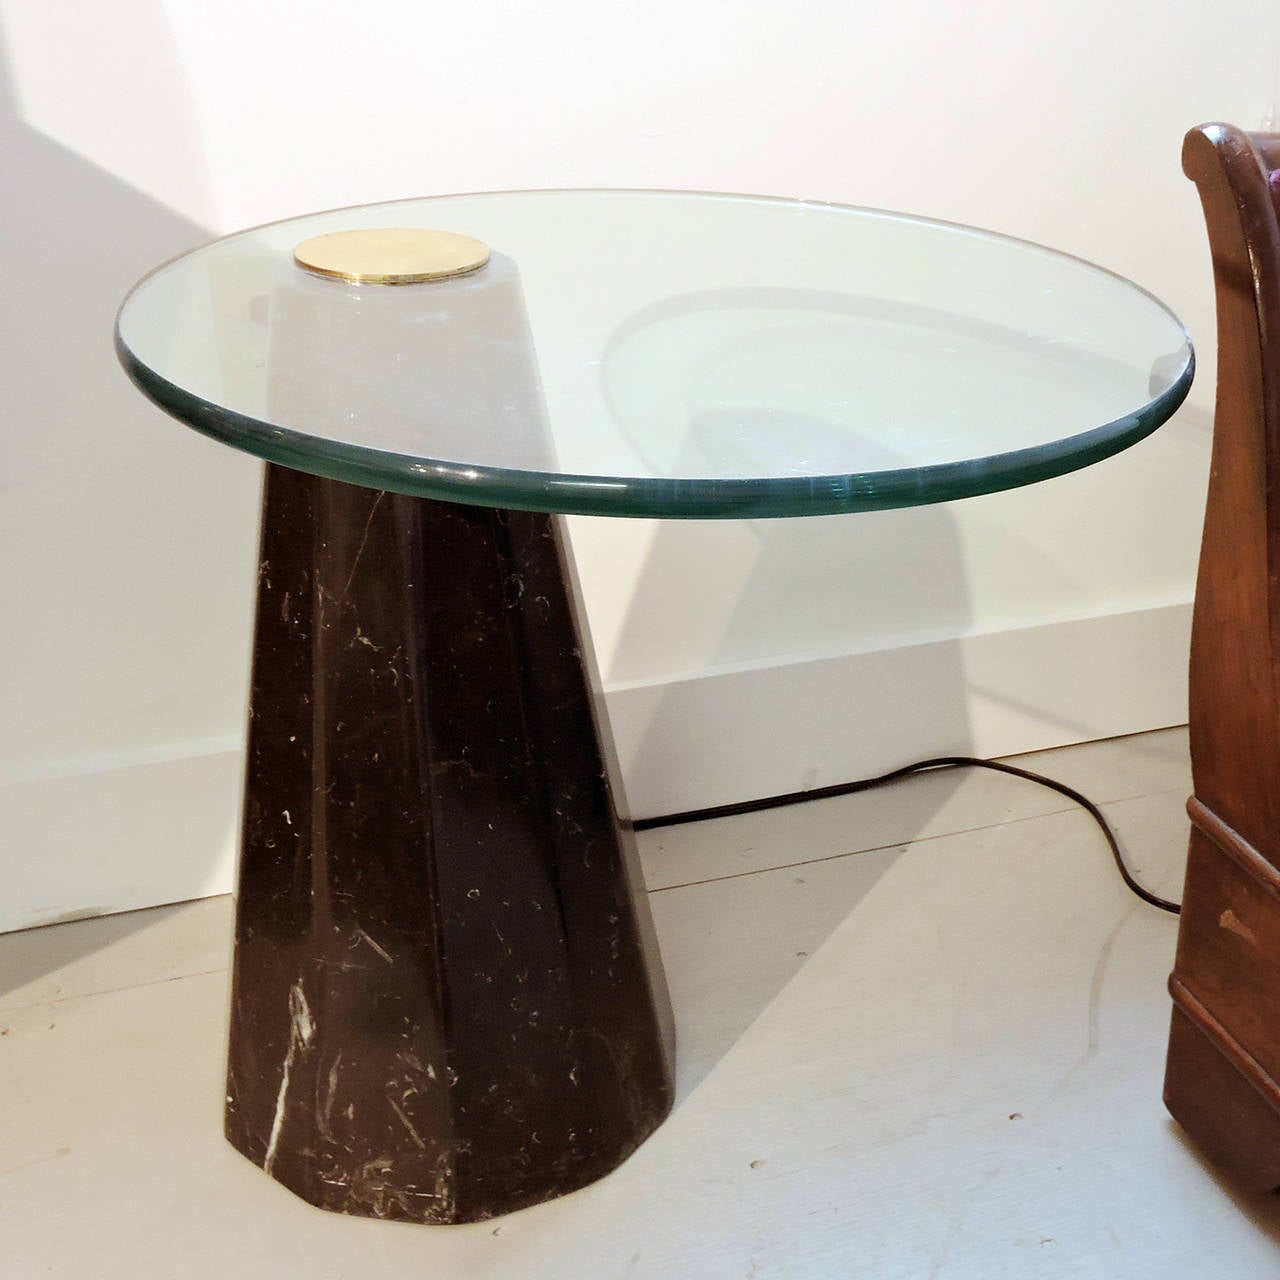 Mid-Century Modern, in the style of Karl Springer, marble and glass cantilevered side table, with pyramid form base and adjustable glass top.
Height: 20 inches, diameter of glass: 19.75 inches, base: 12 inches diameter at widest point.